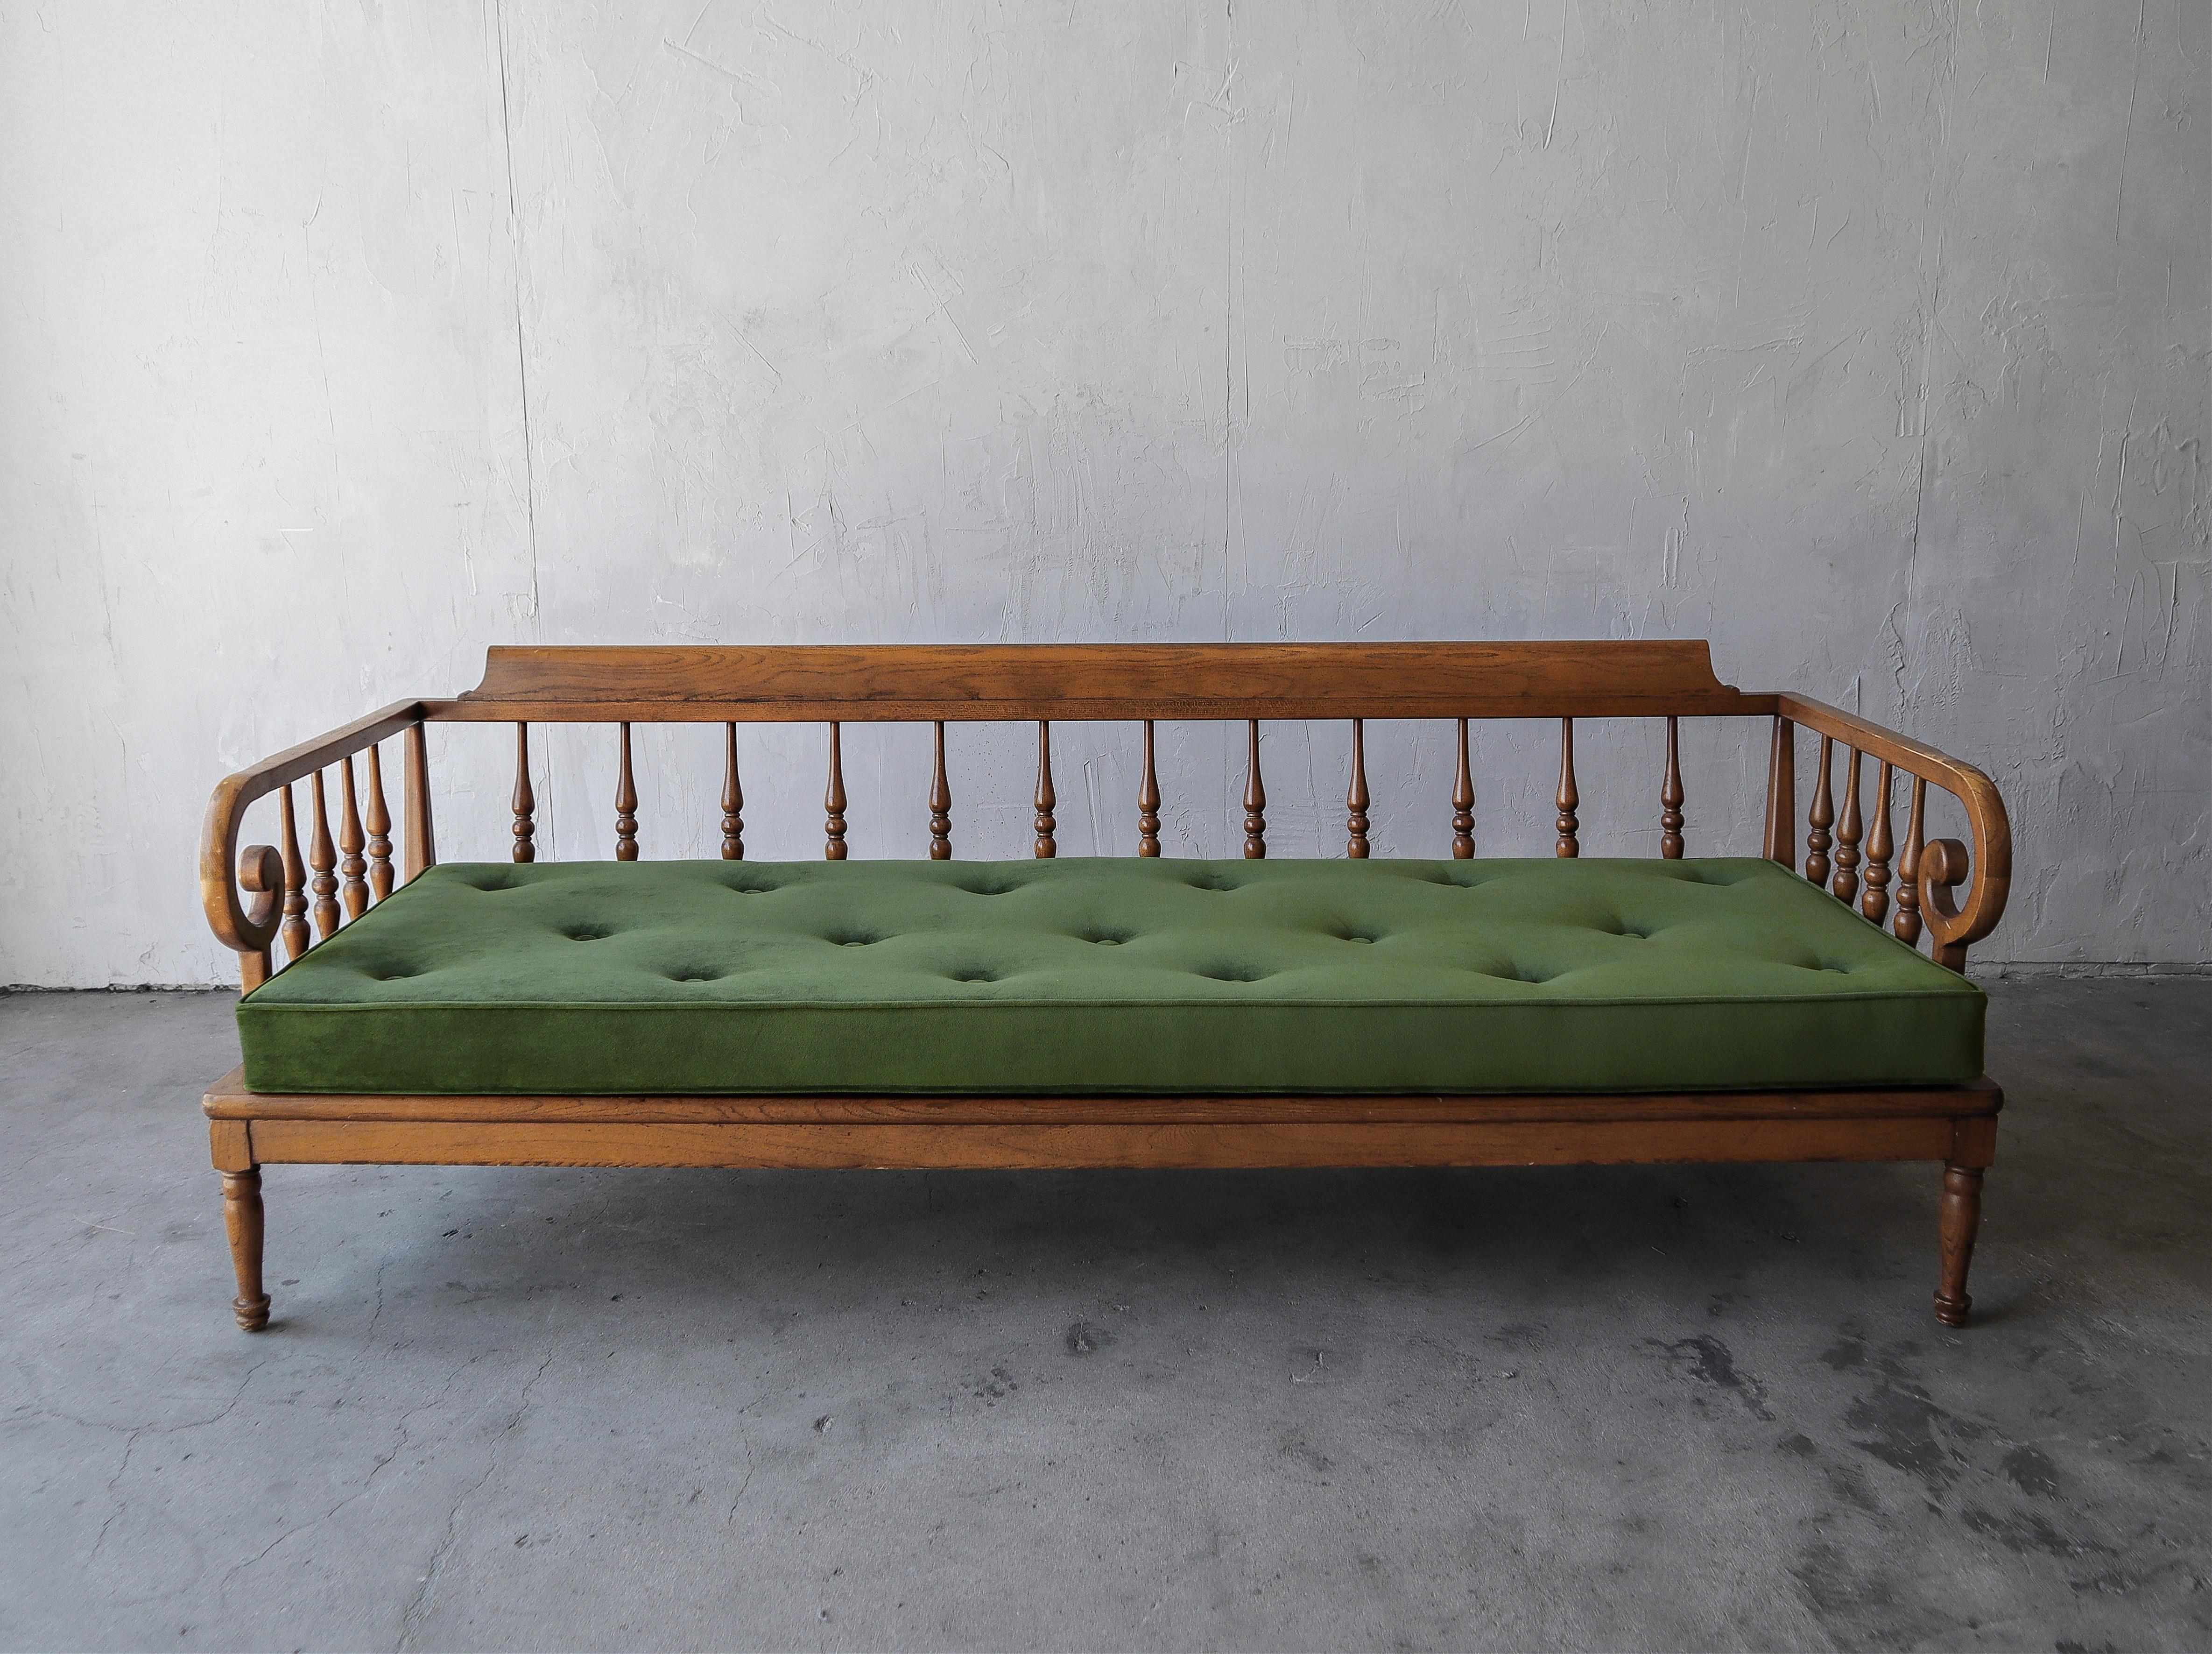 Very nice, original mid century original oak spindle back sofa.

Seat cushion and fabric are all new.  Wood has very minimal marks from age and use.  Please see images.